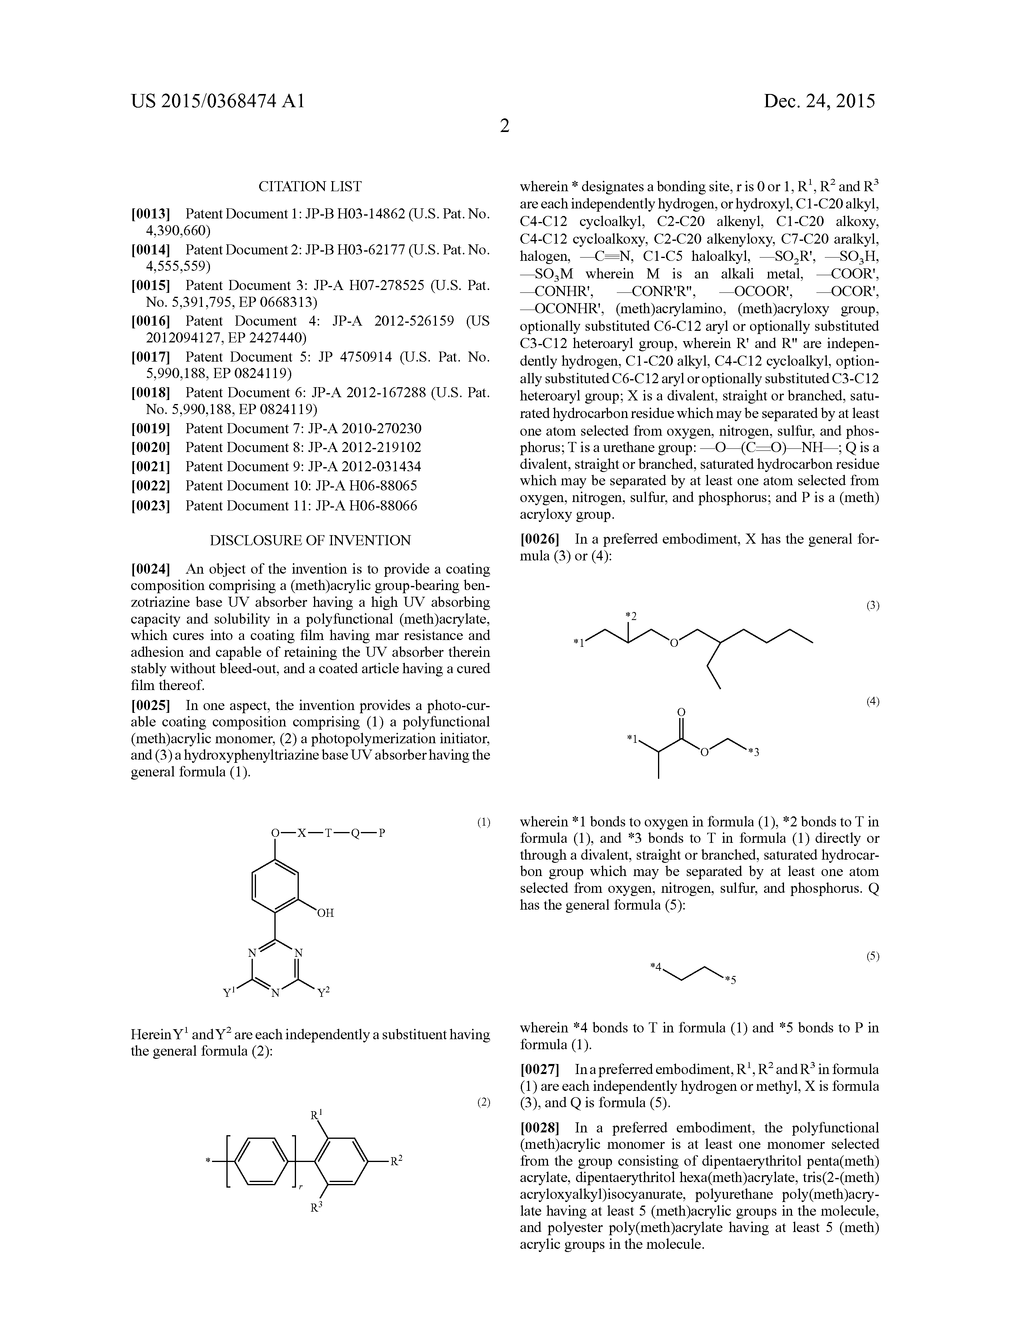 PHOTO-CURABLE COATING COMPOSITION AND COATED ARTICLE - diagram, schematic, and image 03